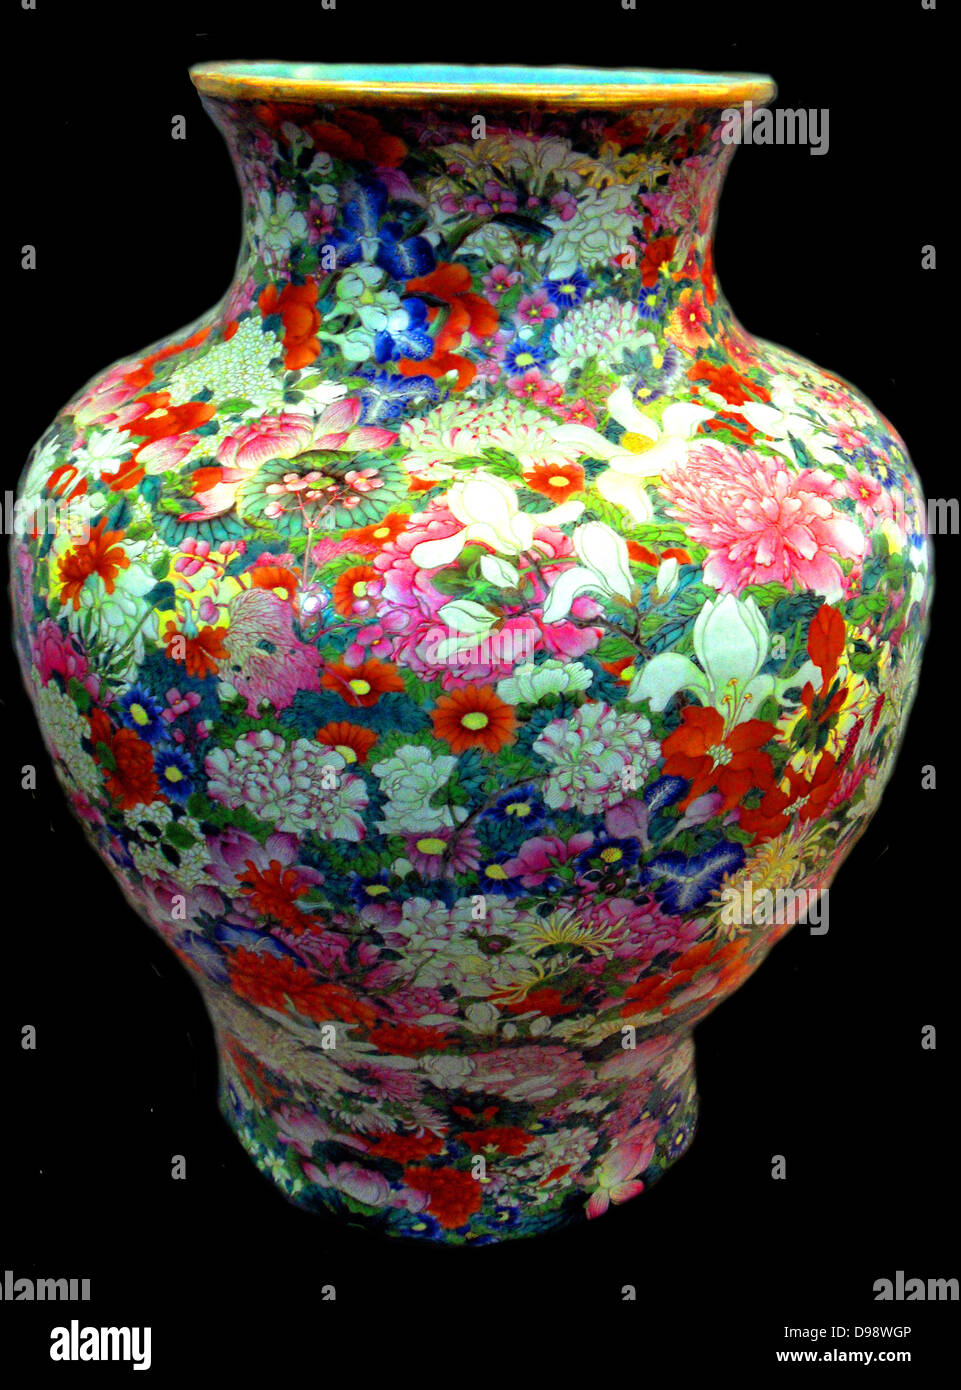 Vase 'Thousand Flowers'. reign of Qianlong (1736-1795) porcelain vase dated 1709, Chinese Stock Photo